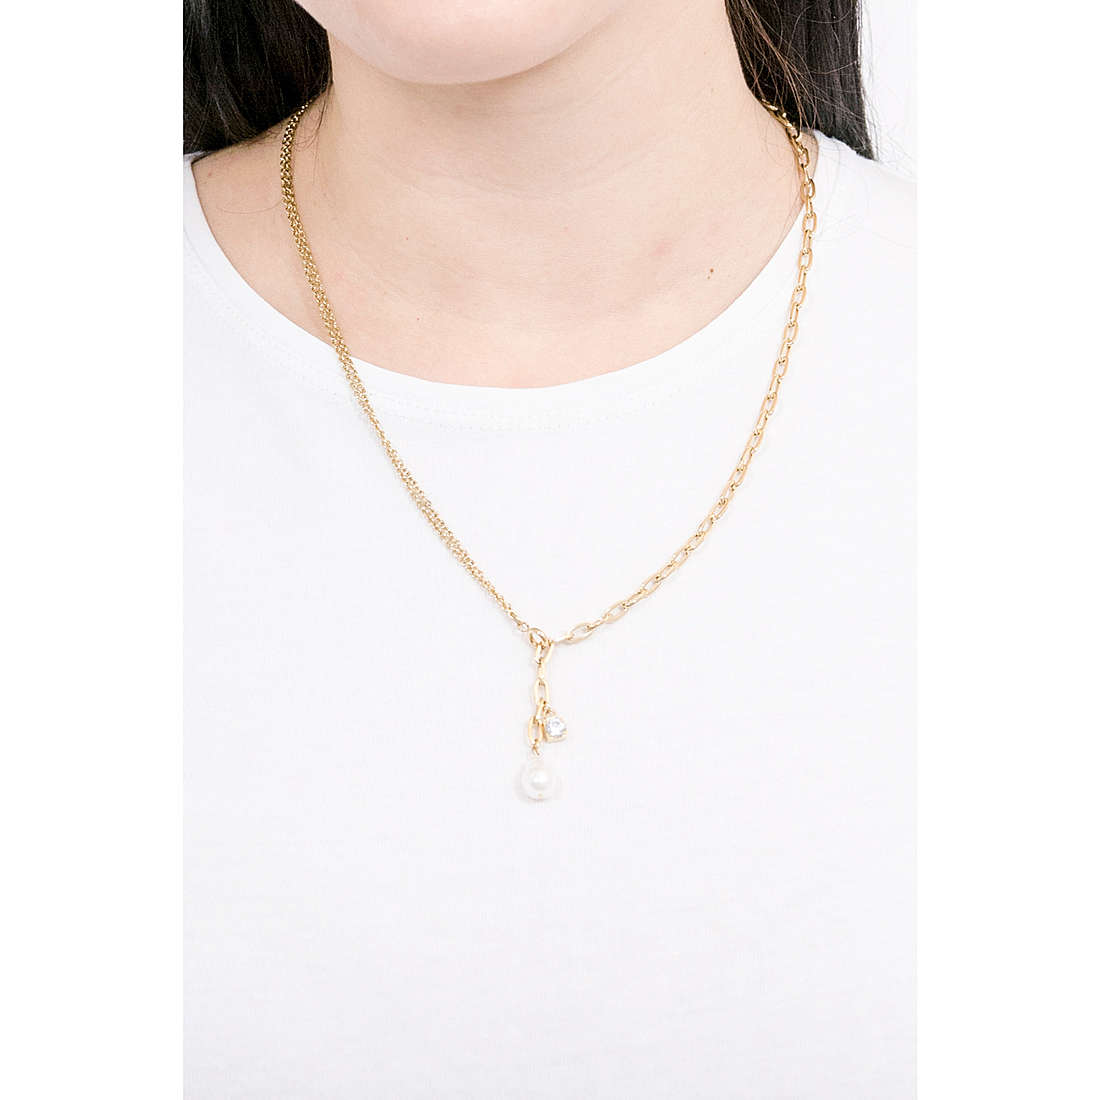 Ops Objects collane Pearl donna OPSCL-724 indosso